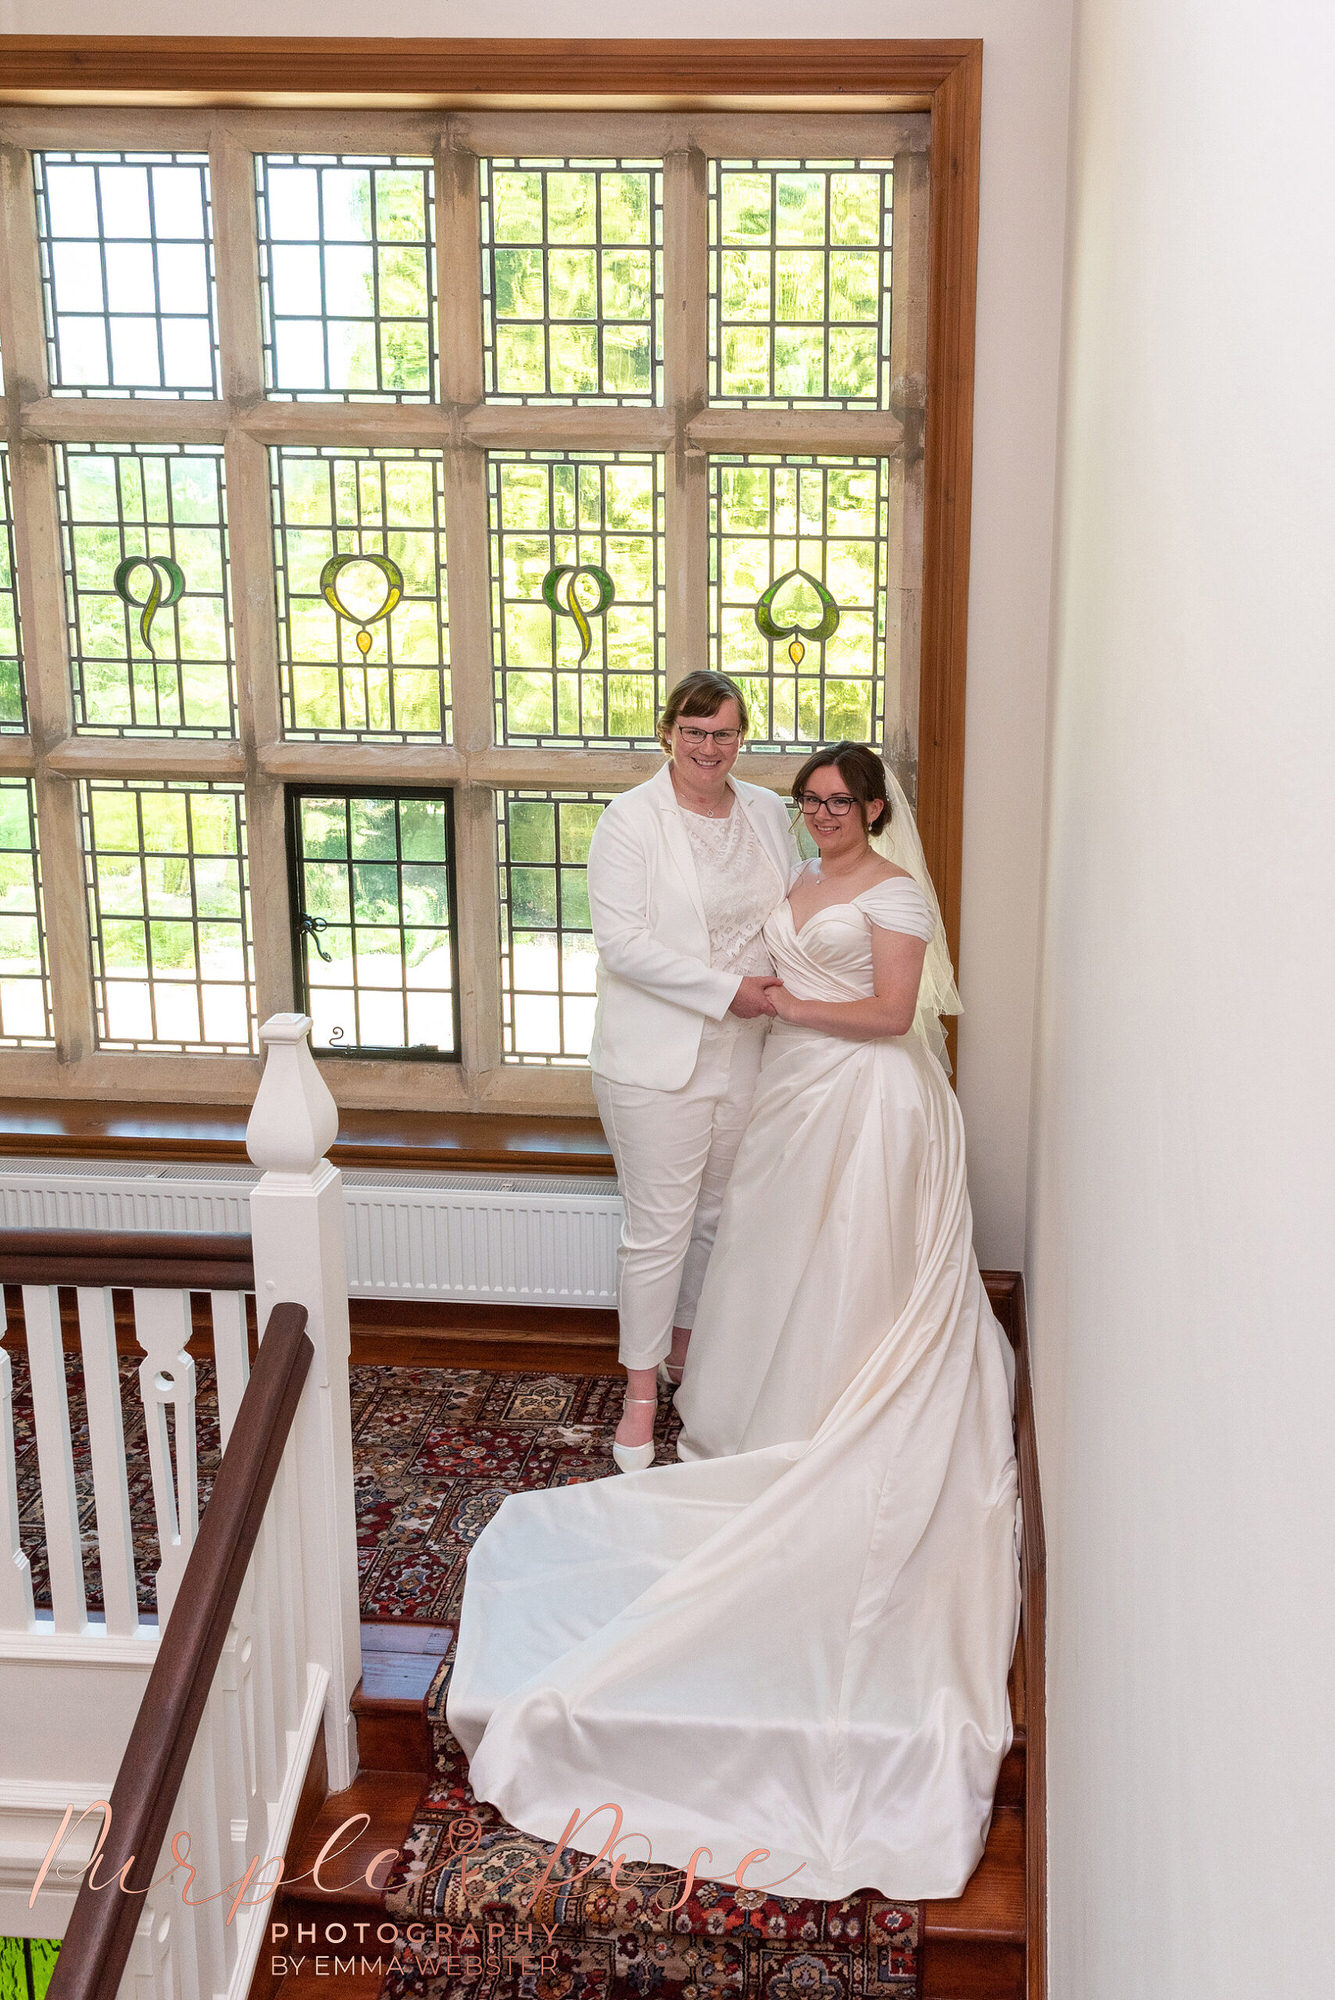 Brides on staircase